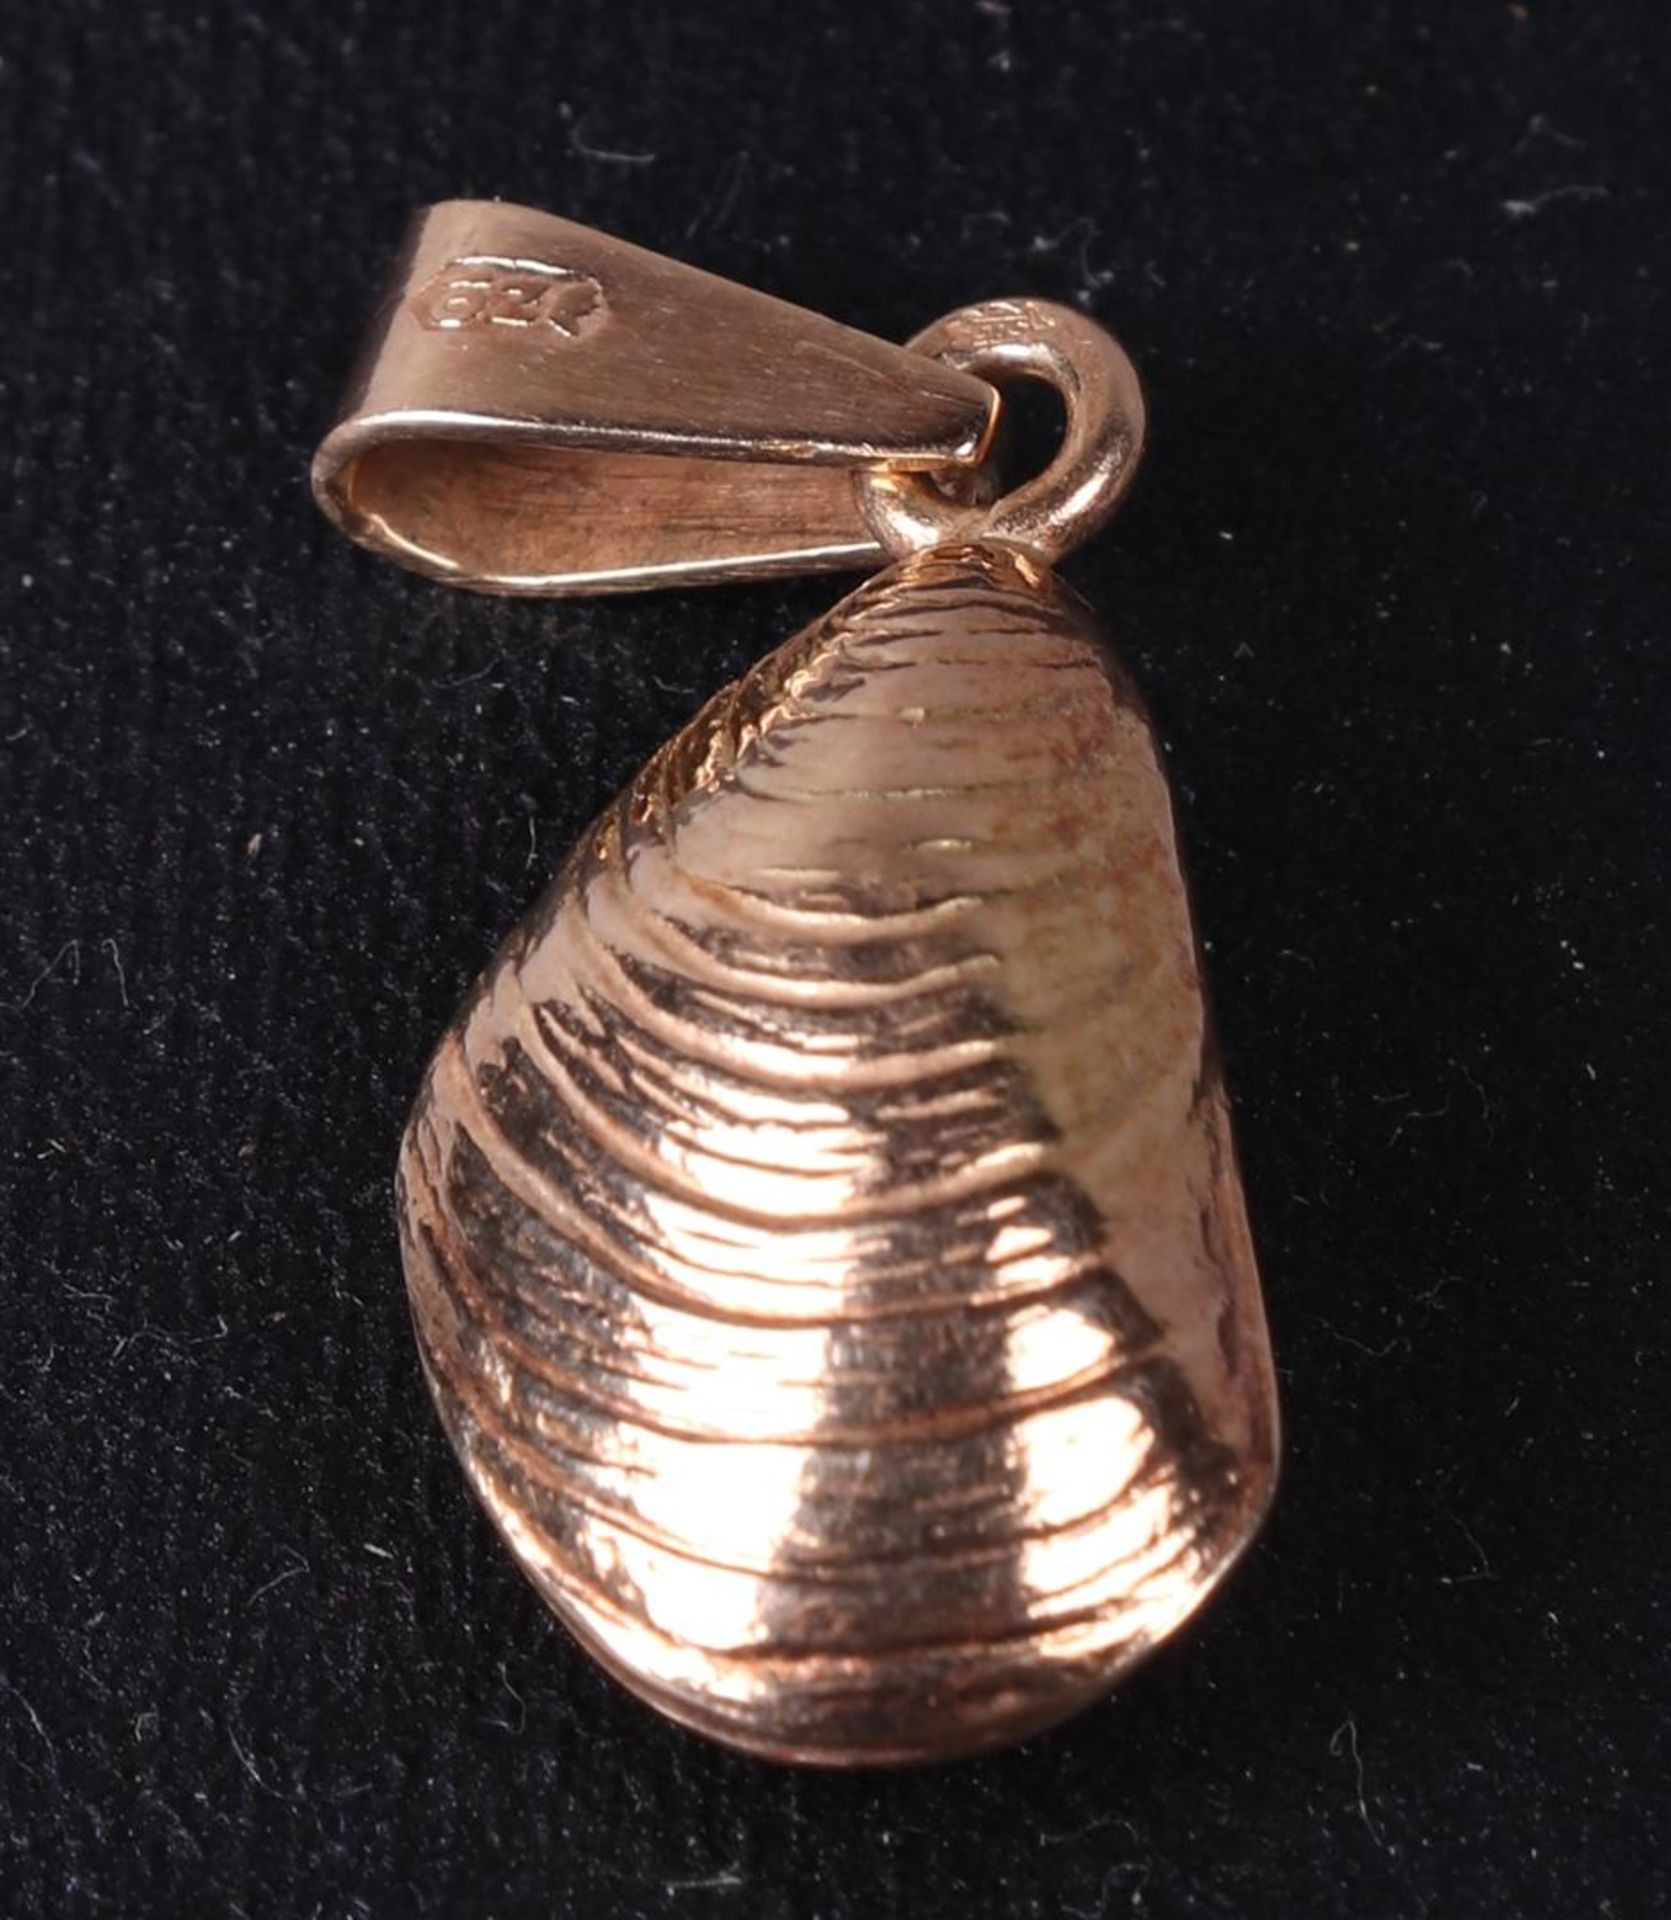 14 carat yellow gold pendant in the shape of a mussel. Hallmarks present